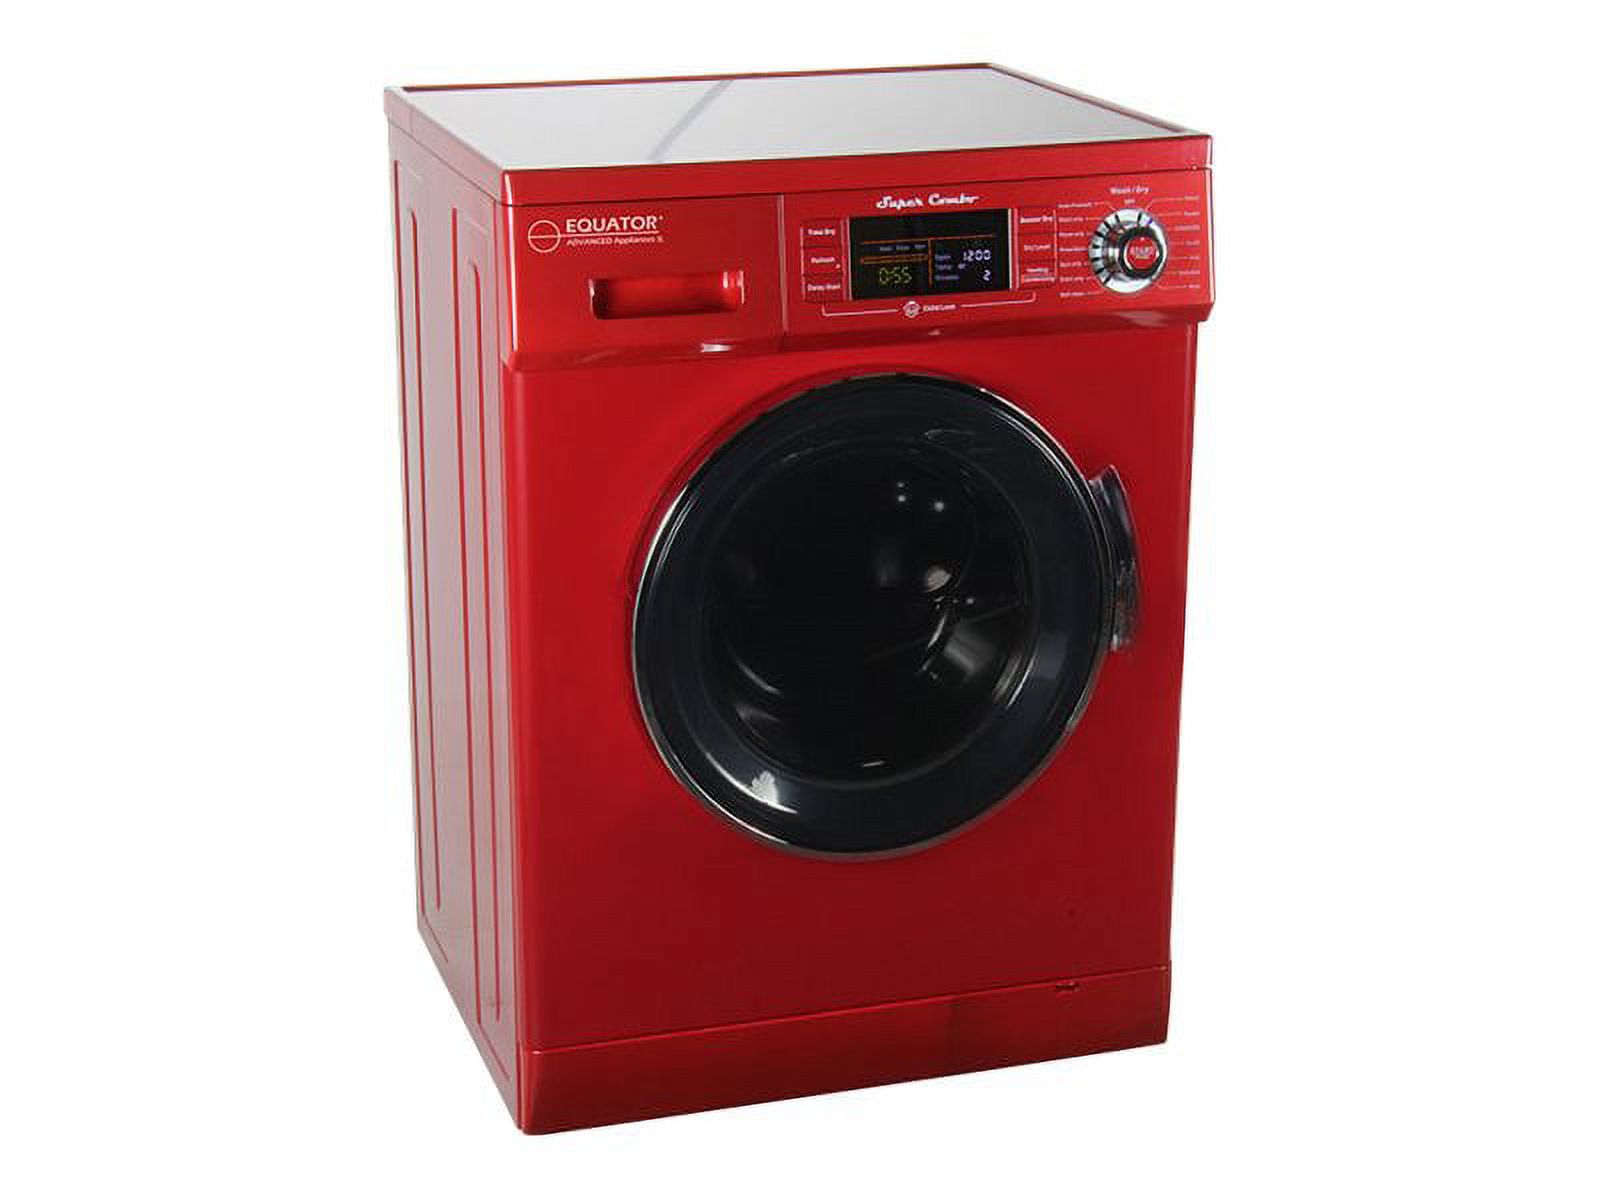 Equator All-in-one 13 lb Compact Combo Washer Dryer, Red - image 5 of 6